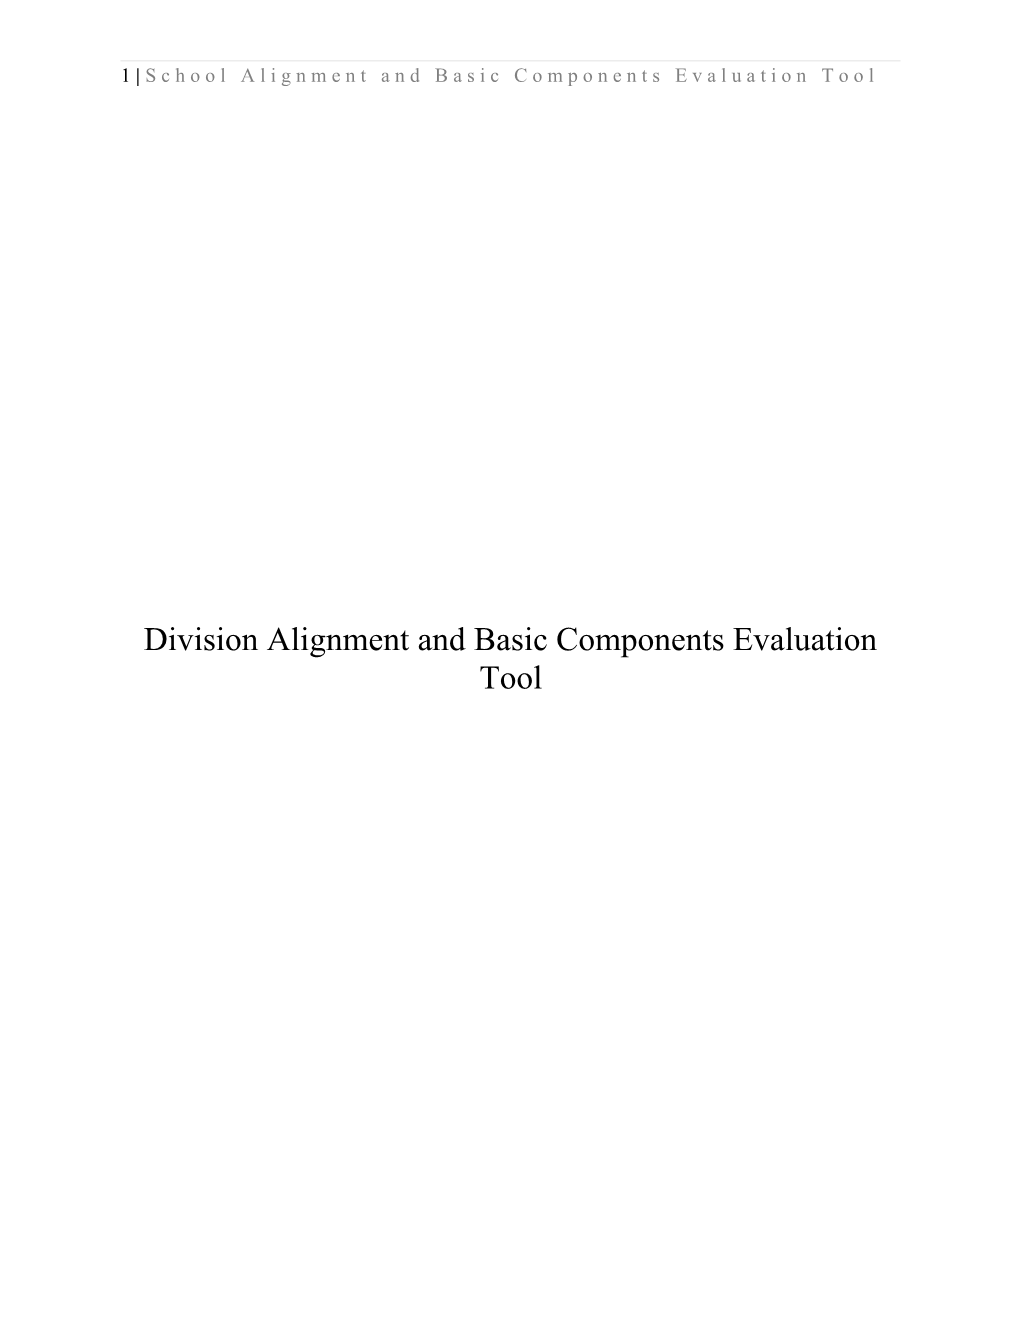 1 School Alignment and Basic Components Evaluation Tool